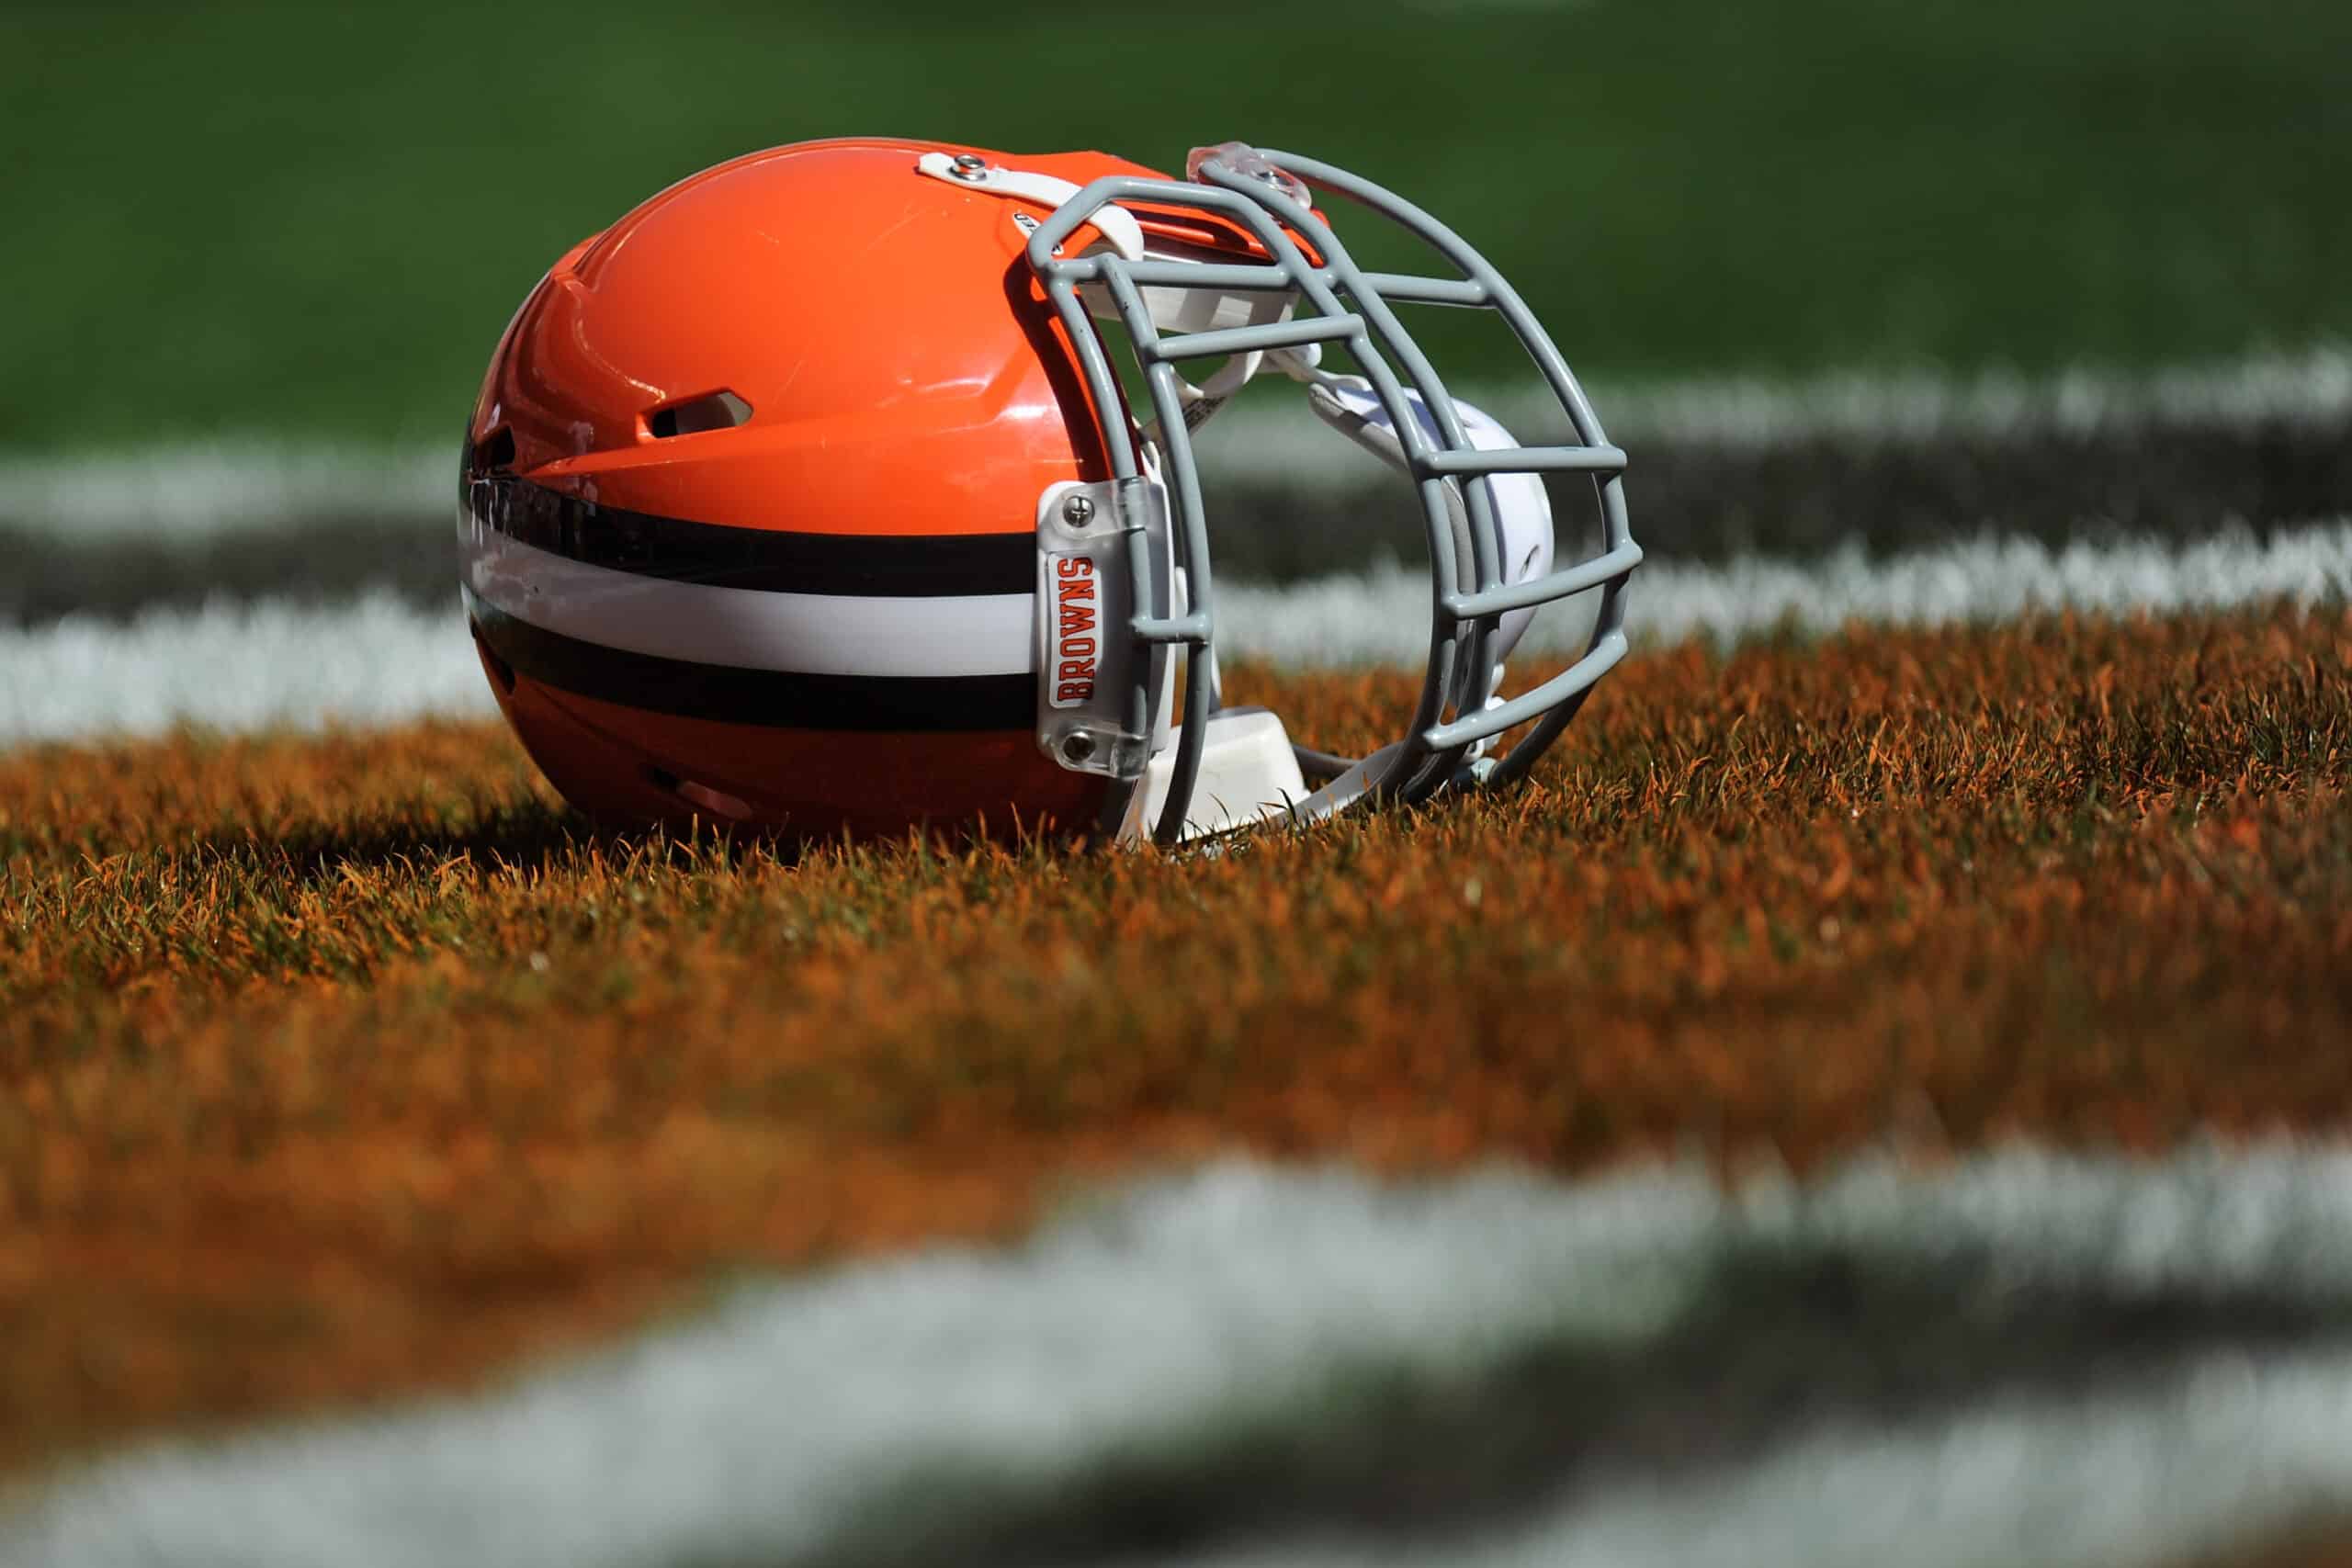 A Cleveland Browns helmet lays in the end zone before the game against the Baltimore Ravens at FirstEnergy Stadium on September 21, 2014 in Cleveland, Ohio. The Ravens defeat the Browns 23-21.